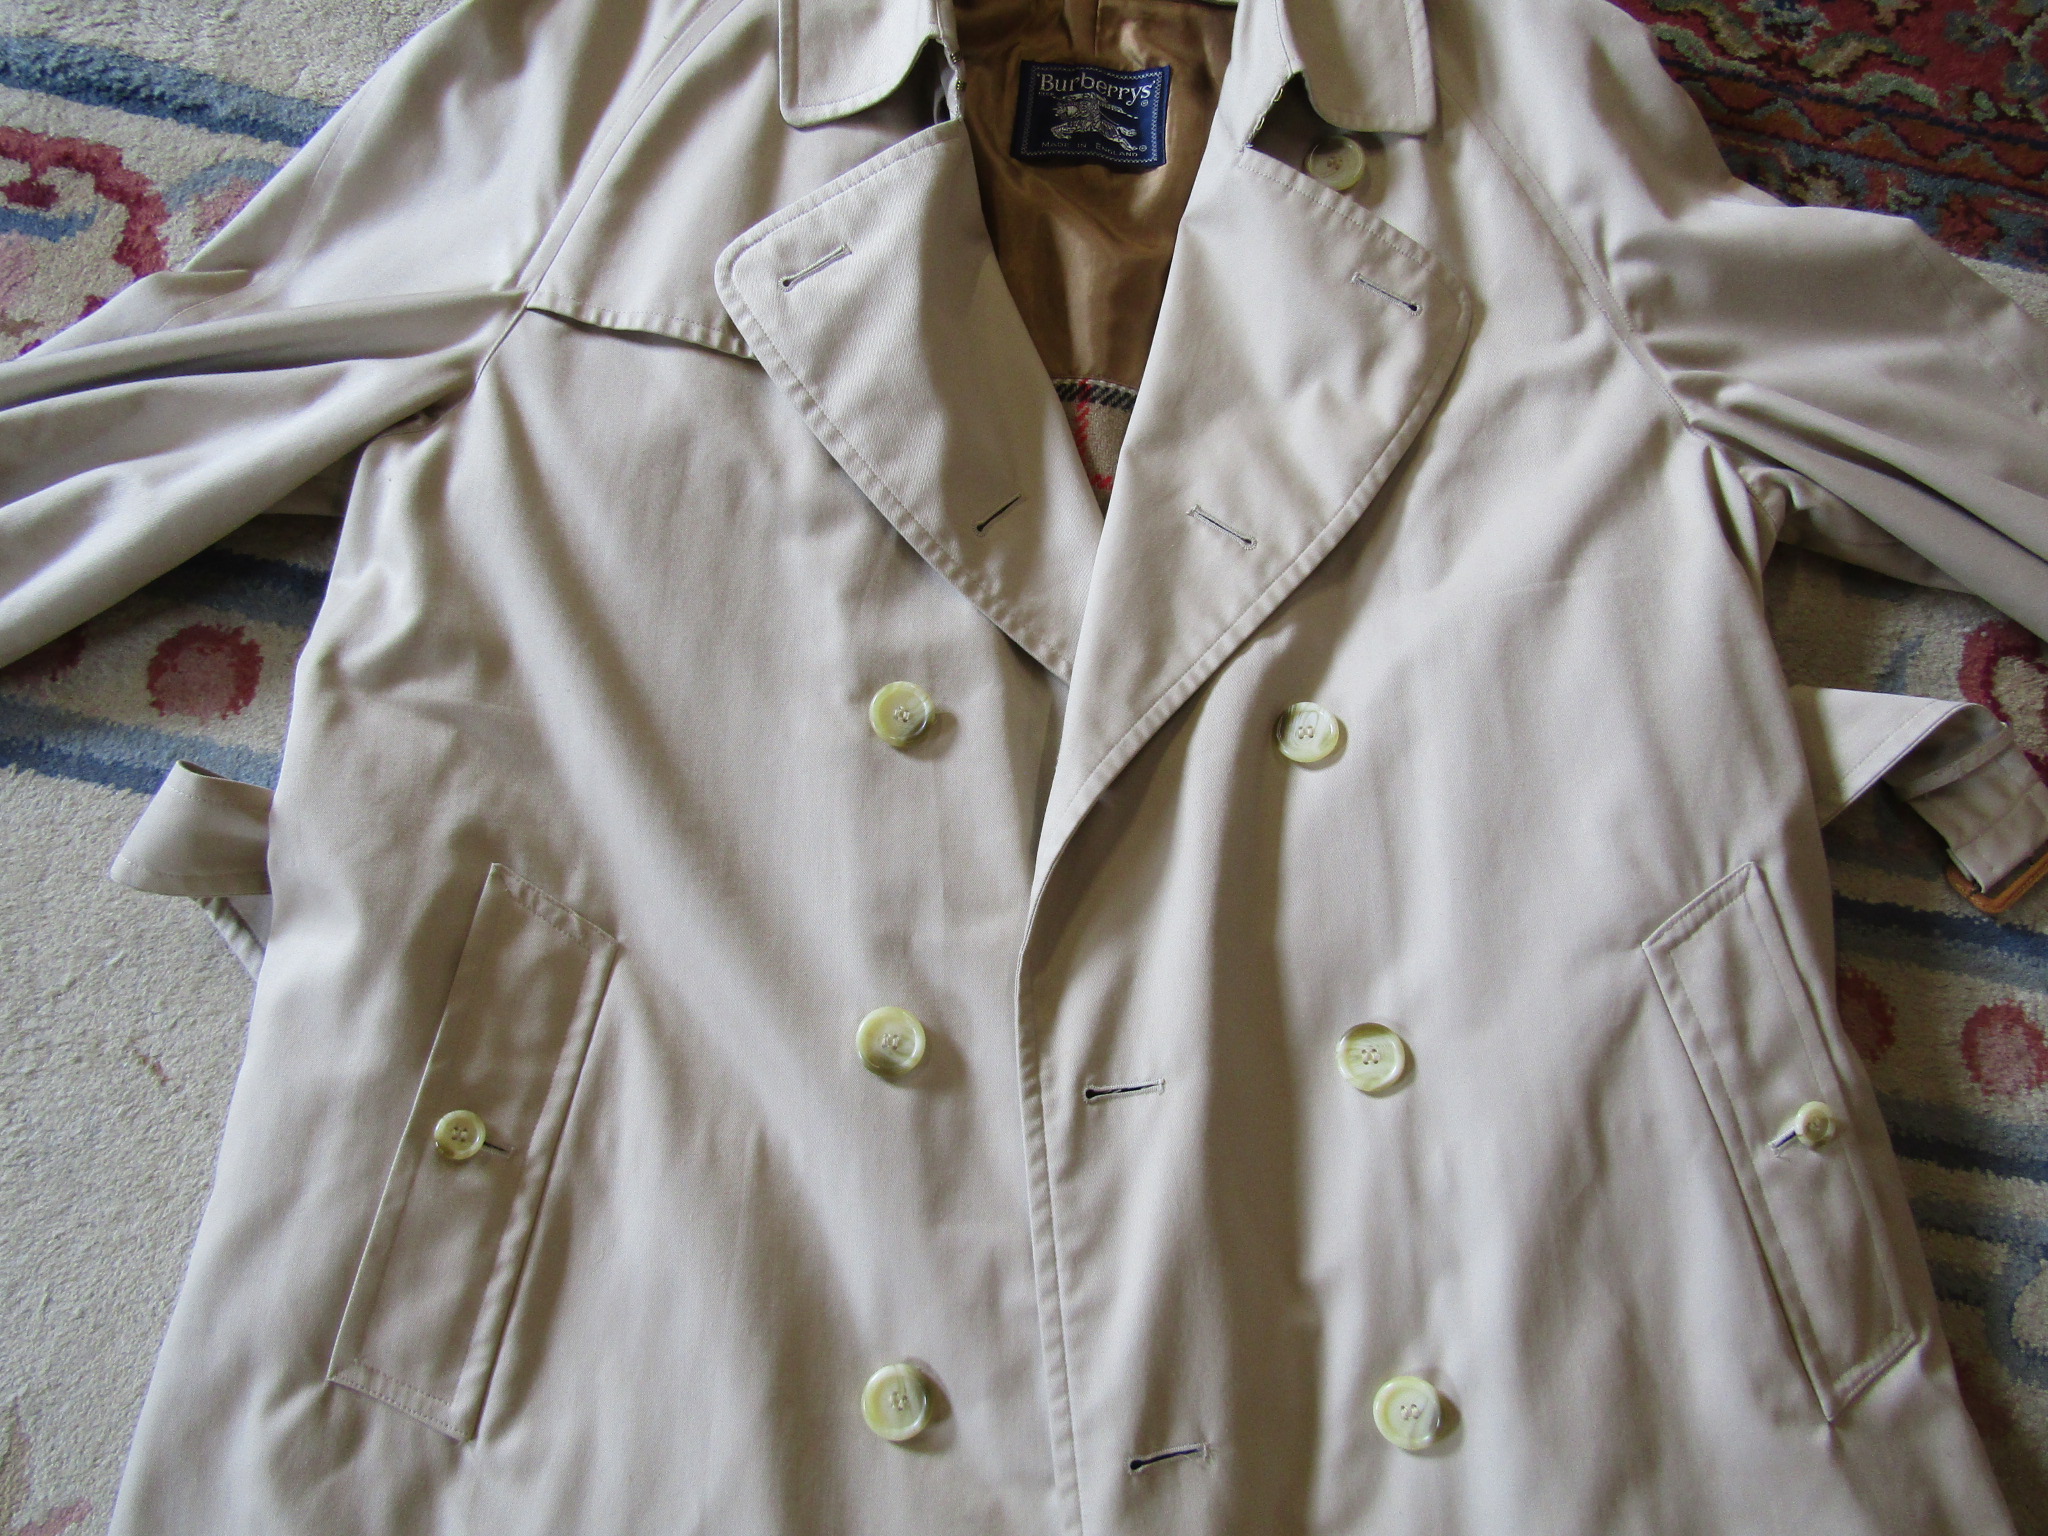 Vintage Burberry rain coat / mac / trench coat with detachable lining - size 52 reg - - Image 13 of 20